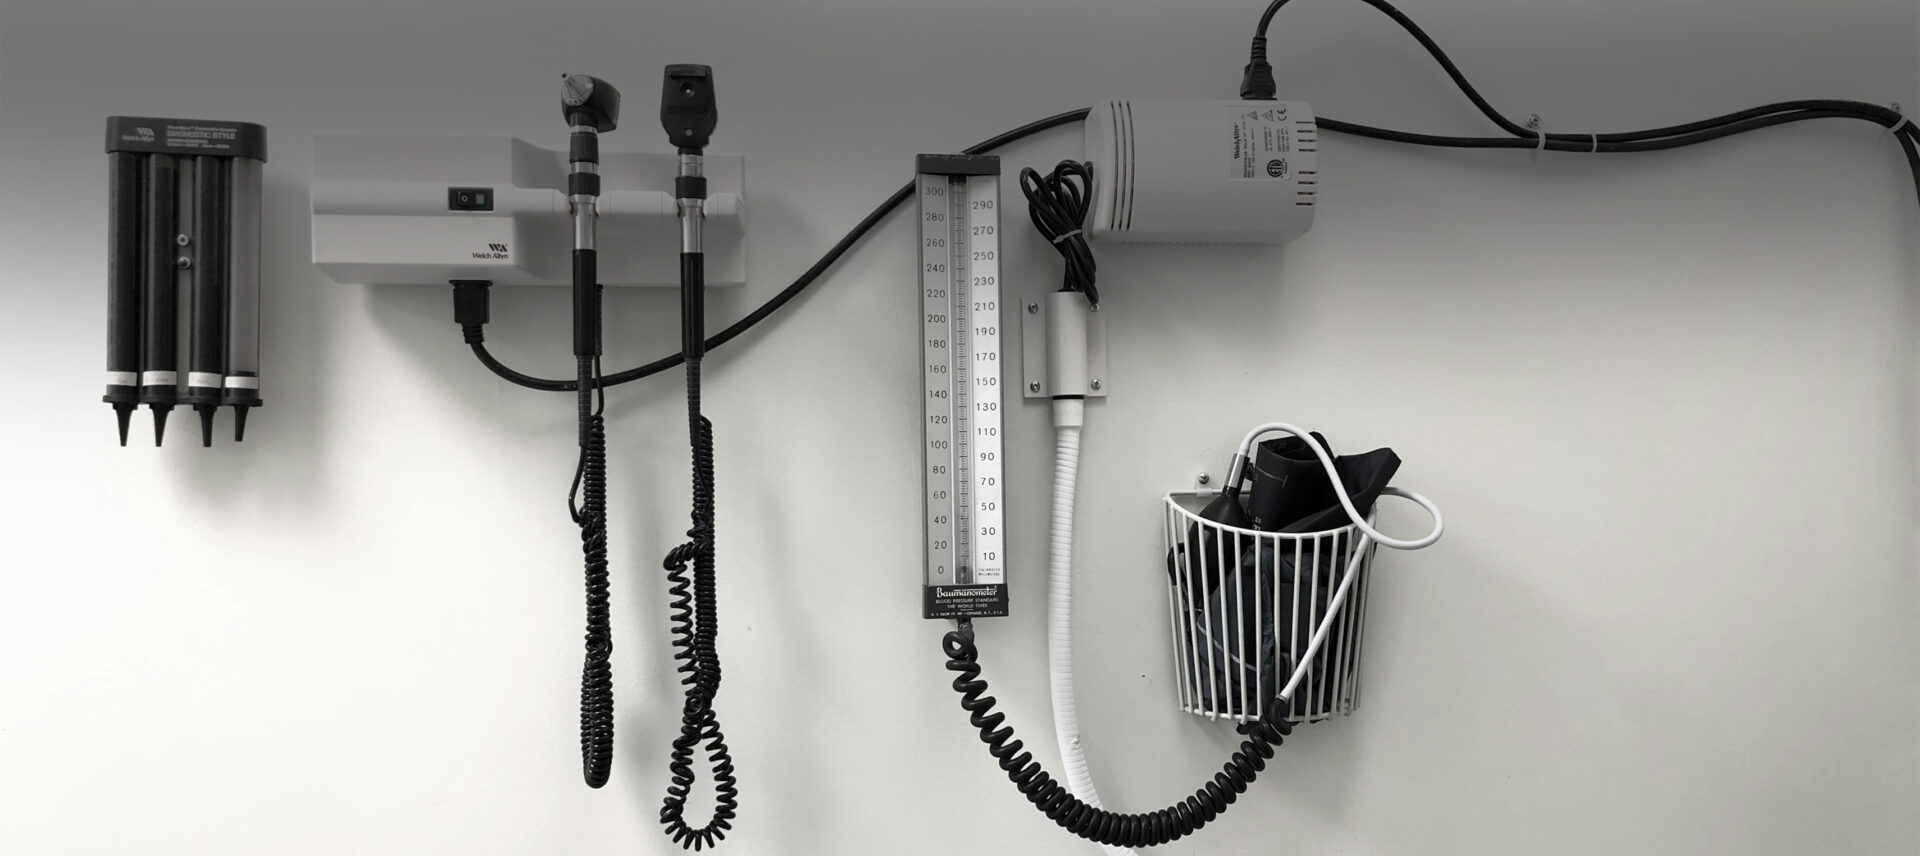 medtech devices mounted on a wall